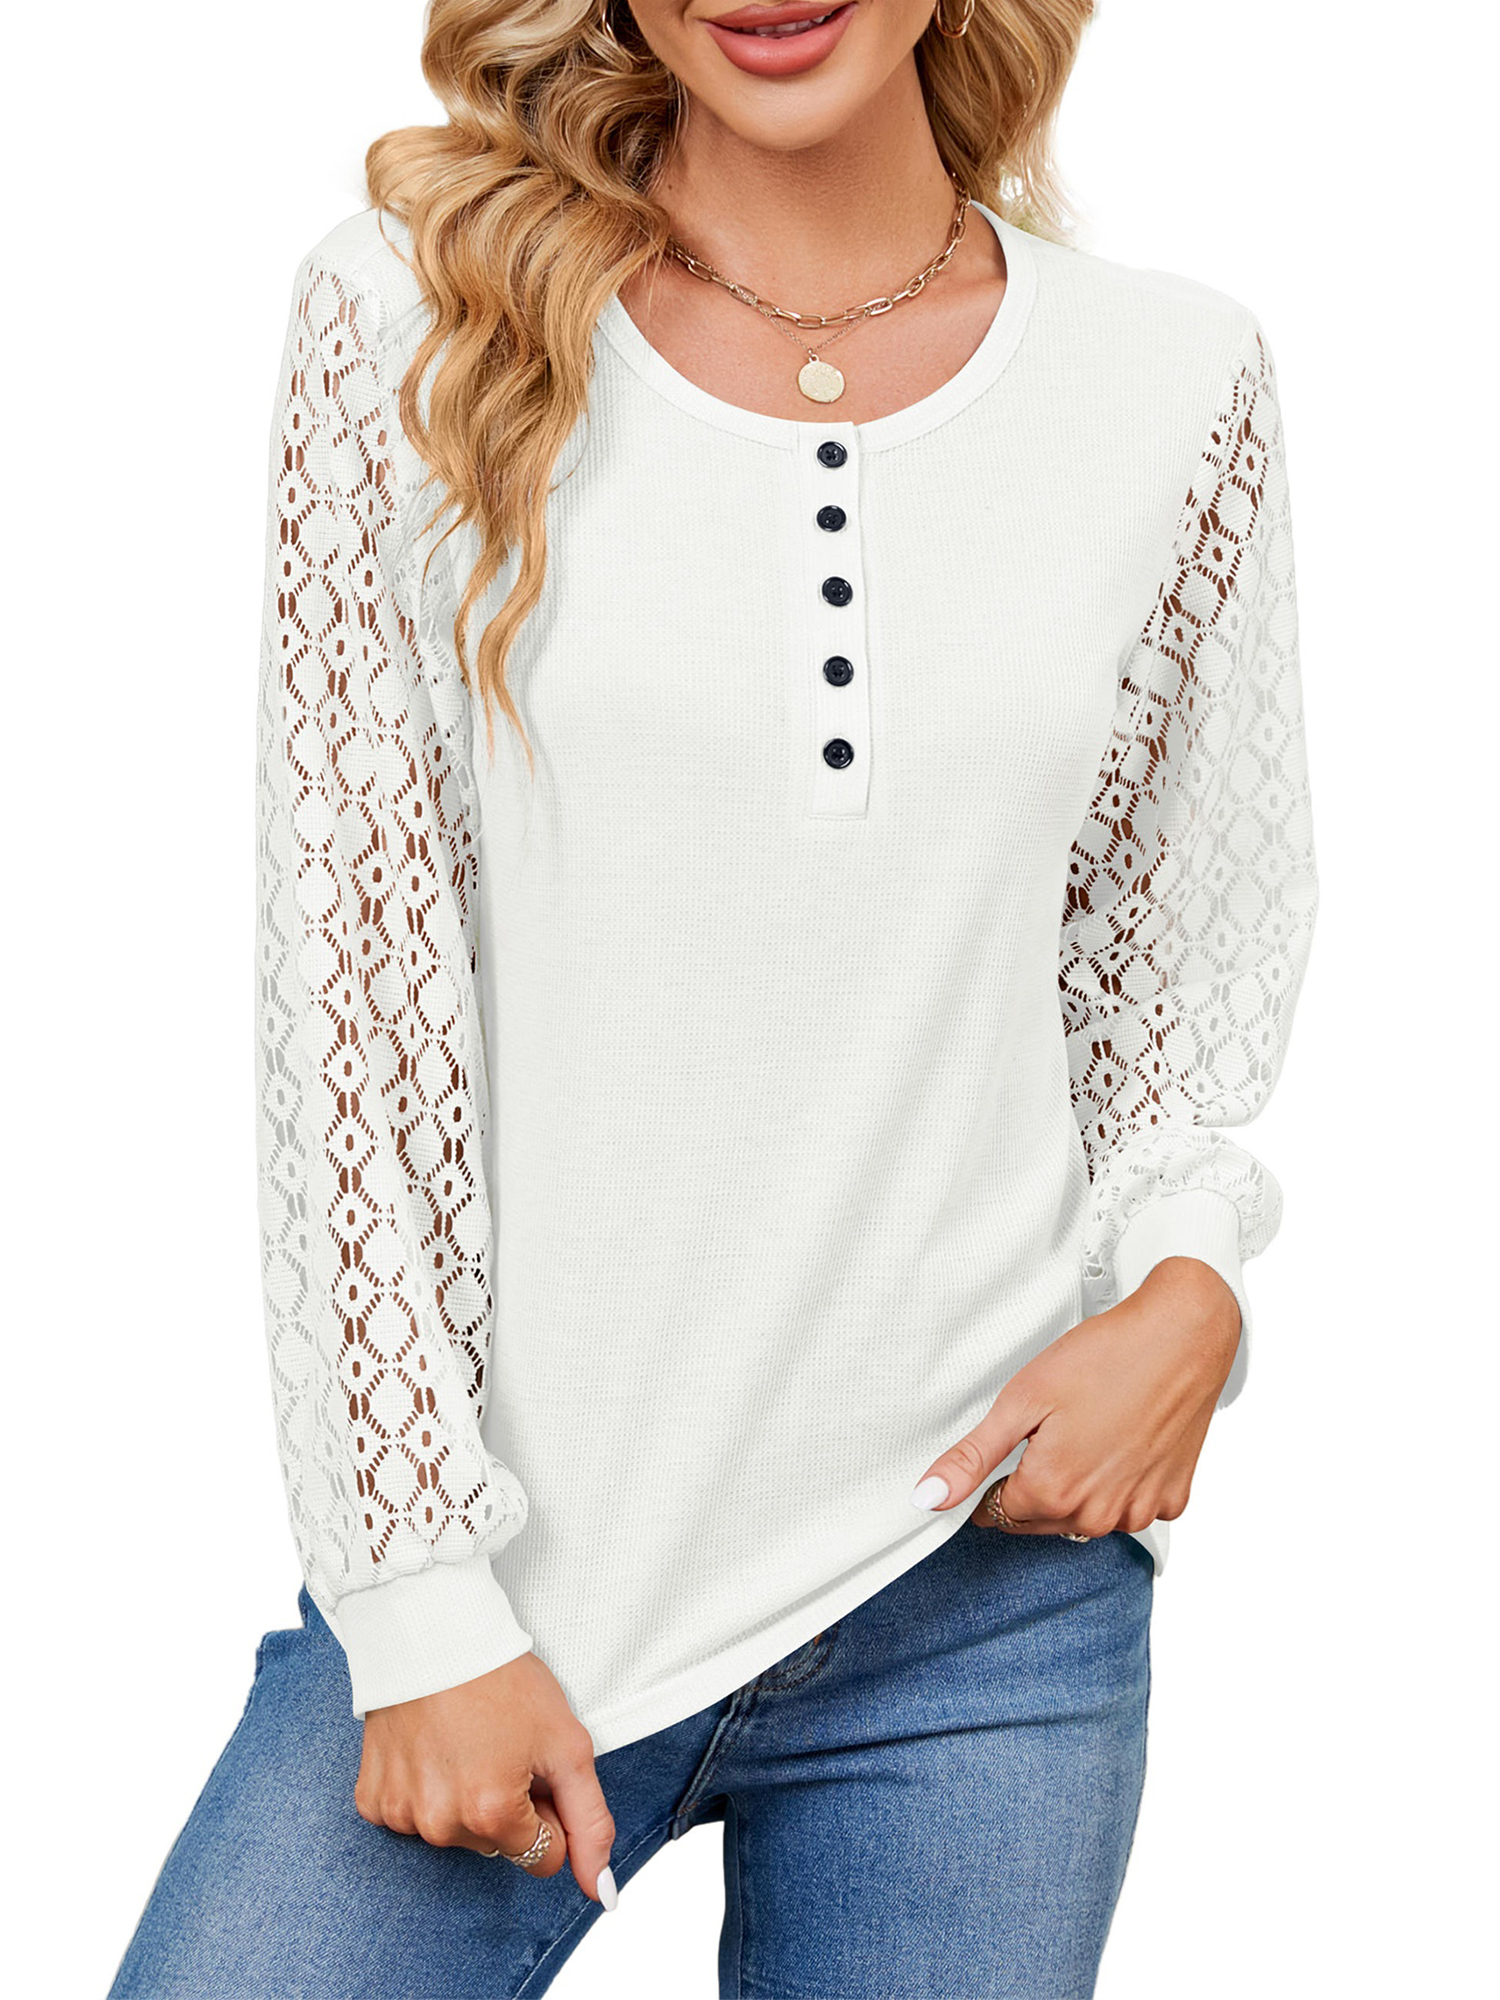 The Pioneer Woman Lace Up Neck Blouse, Women's - Walmart.com